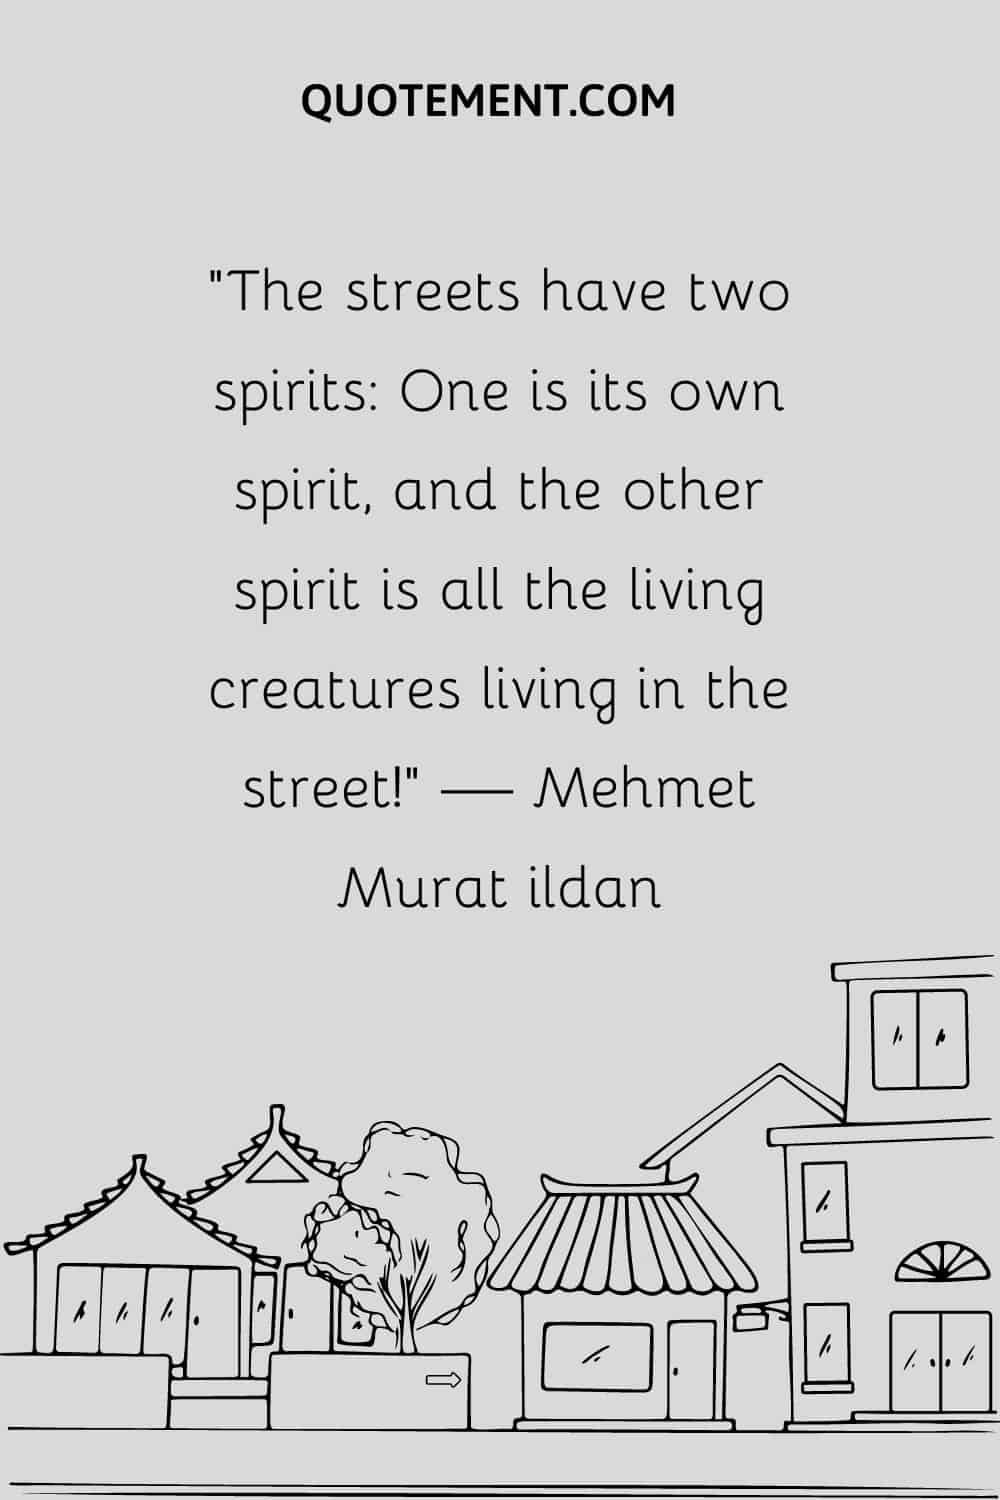 The streets have two spirits One is its own spirit, and the other spirit is all the living creatures living in the street